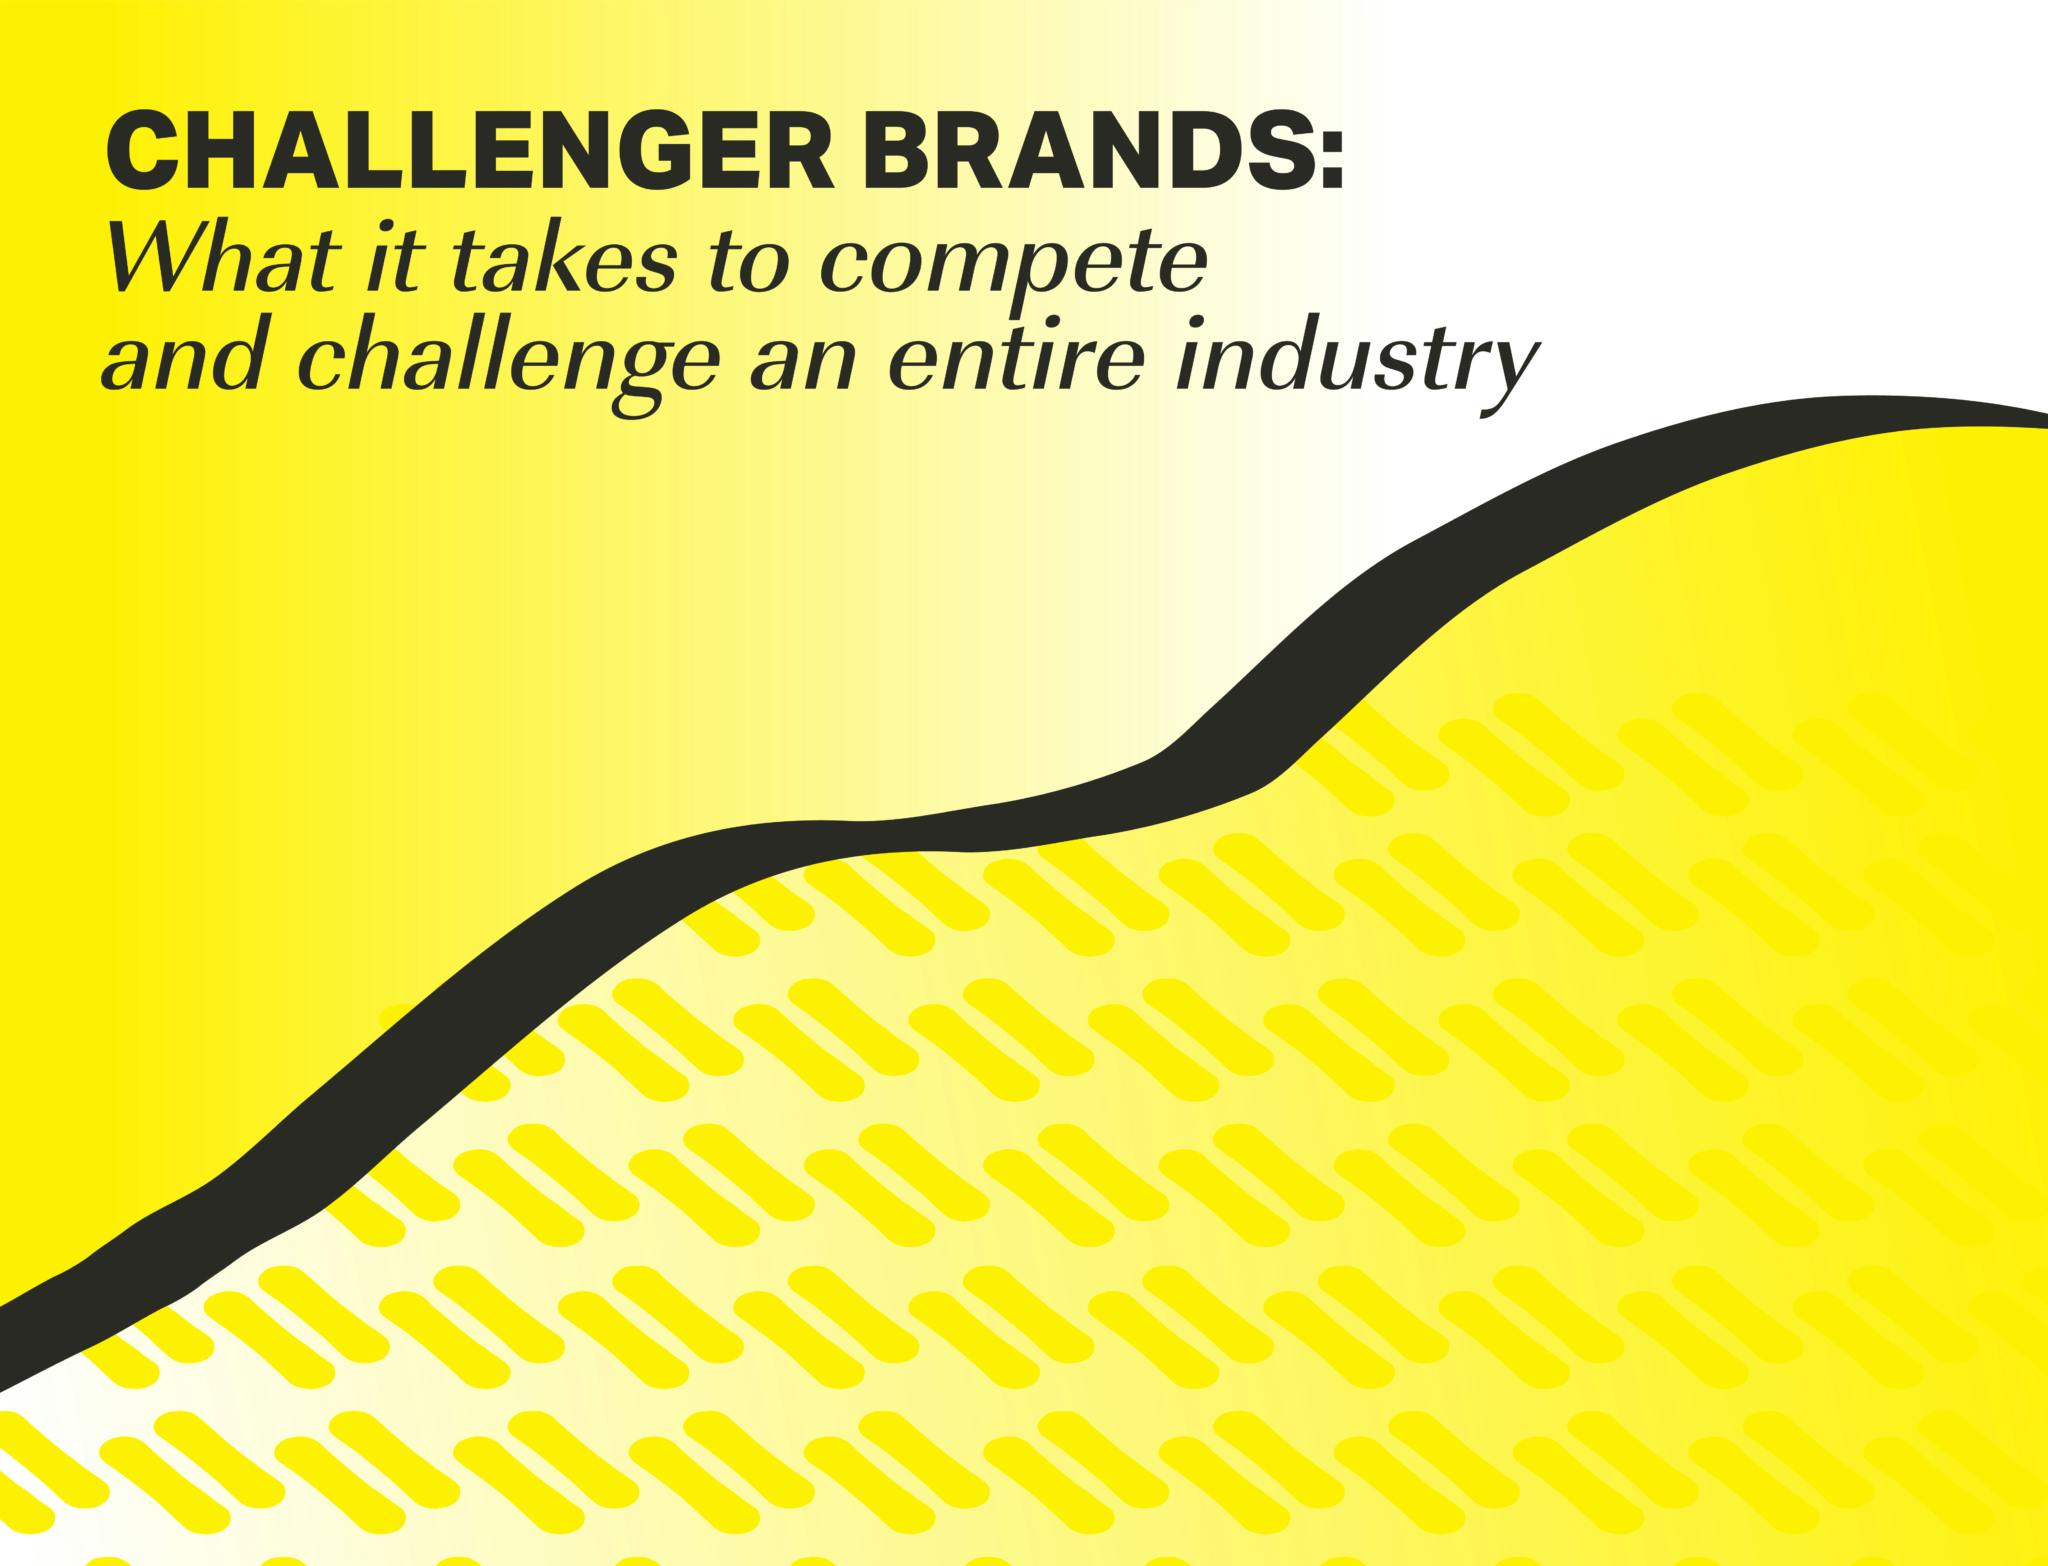 Challenger Brands: What it Takes to Compete and Challenge an Entire Industry